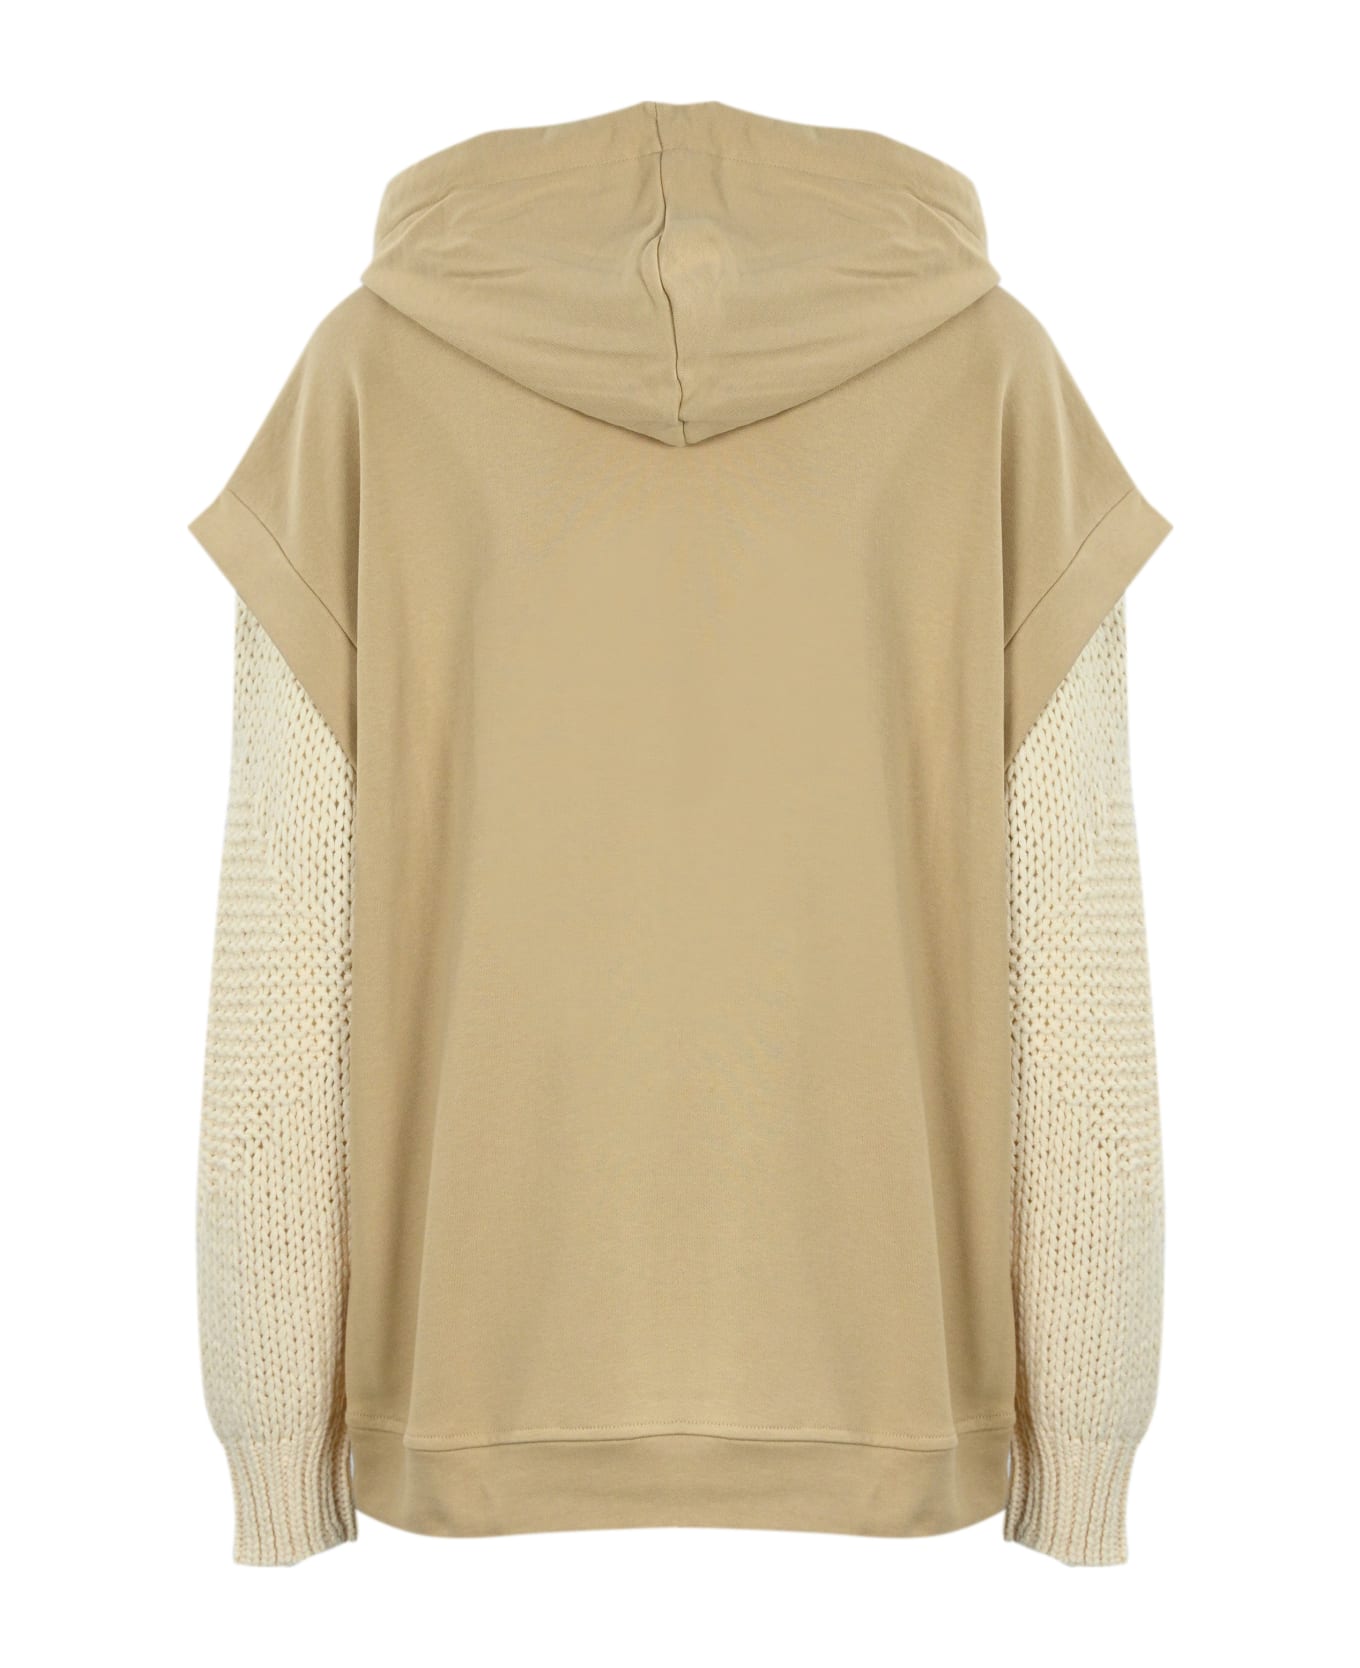 TwinSet Sweatshirt With Knitted Sleeves TwinSet - ALMOND ジャケット